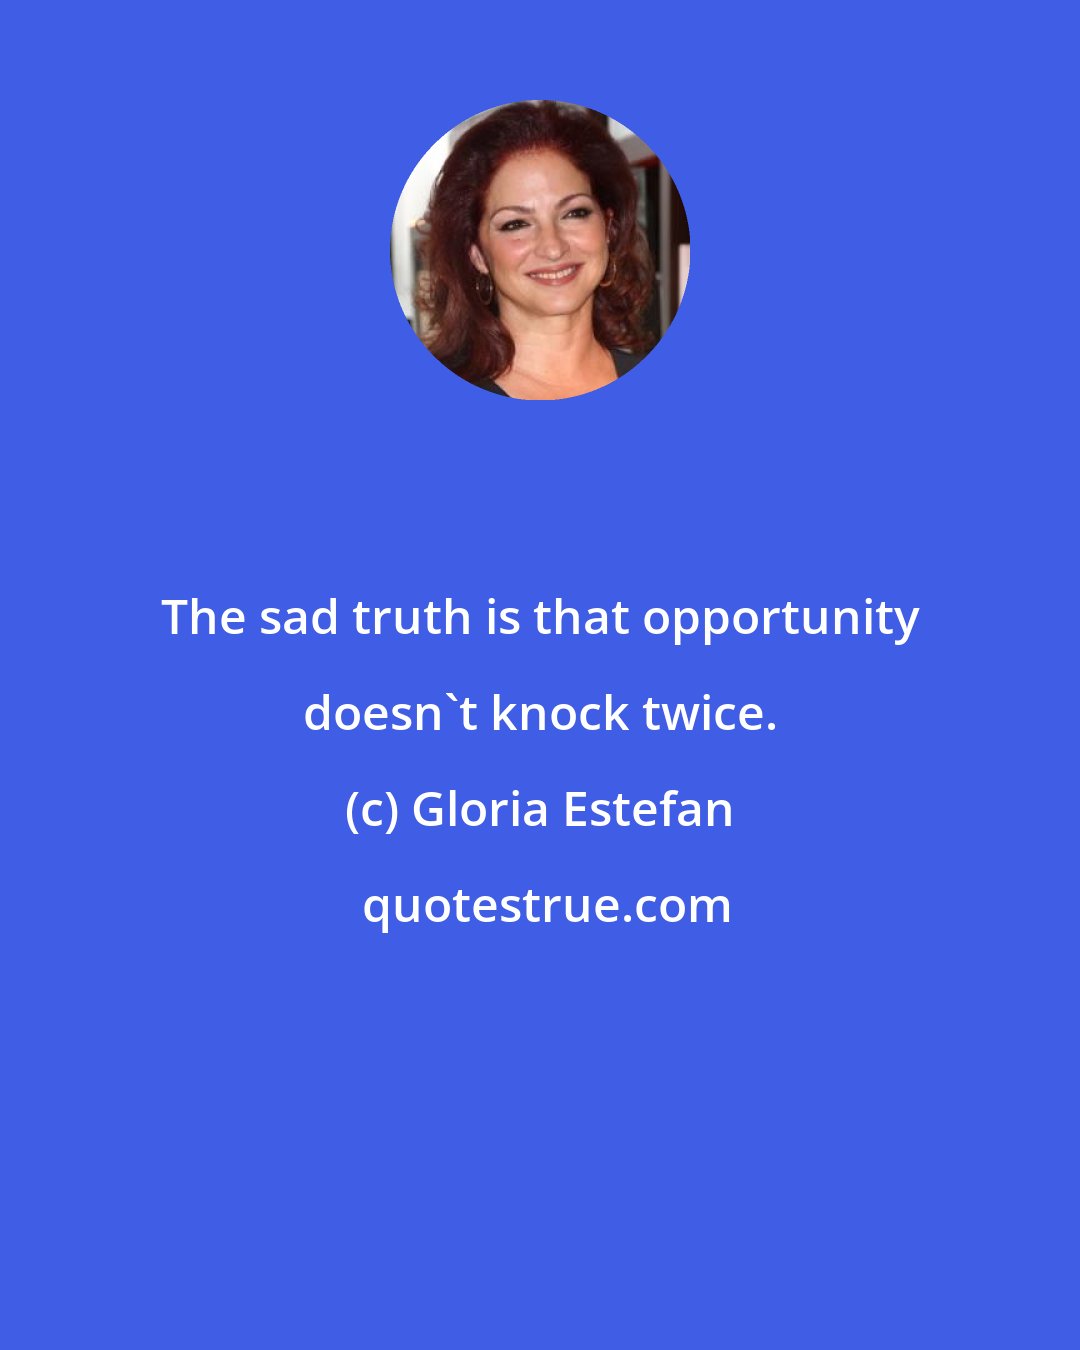 Gloria Estefan: The sad truth is that opportunity doesn't knock twice.